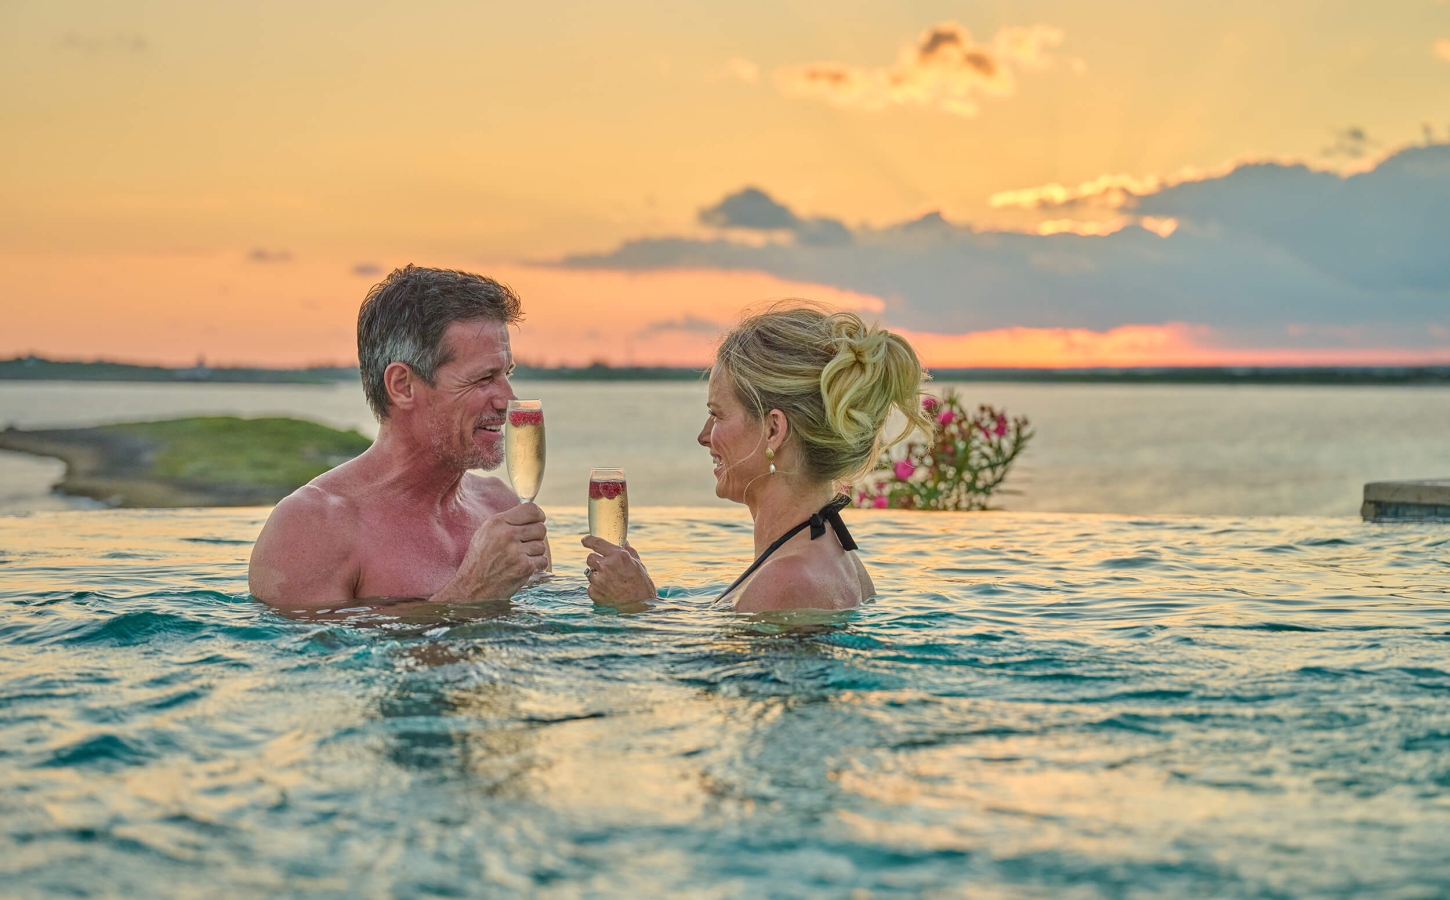 Couple in an infinity pool enjoying a tropical sunset, embodying the romantic club lifestyle at The Abaco Club.